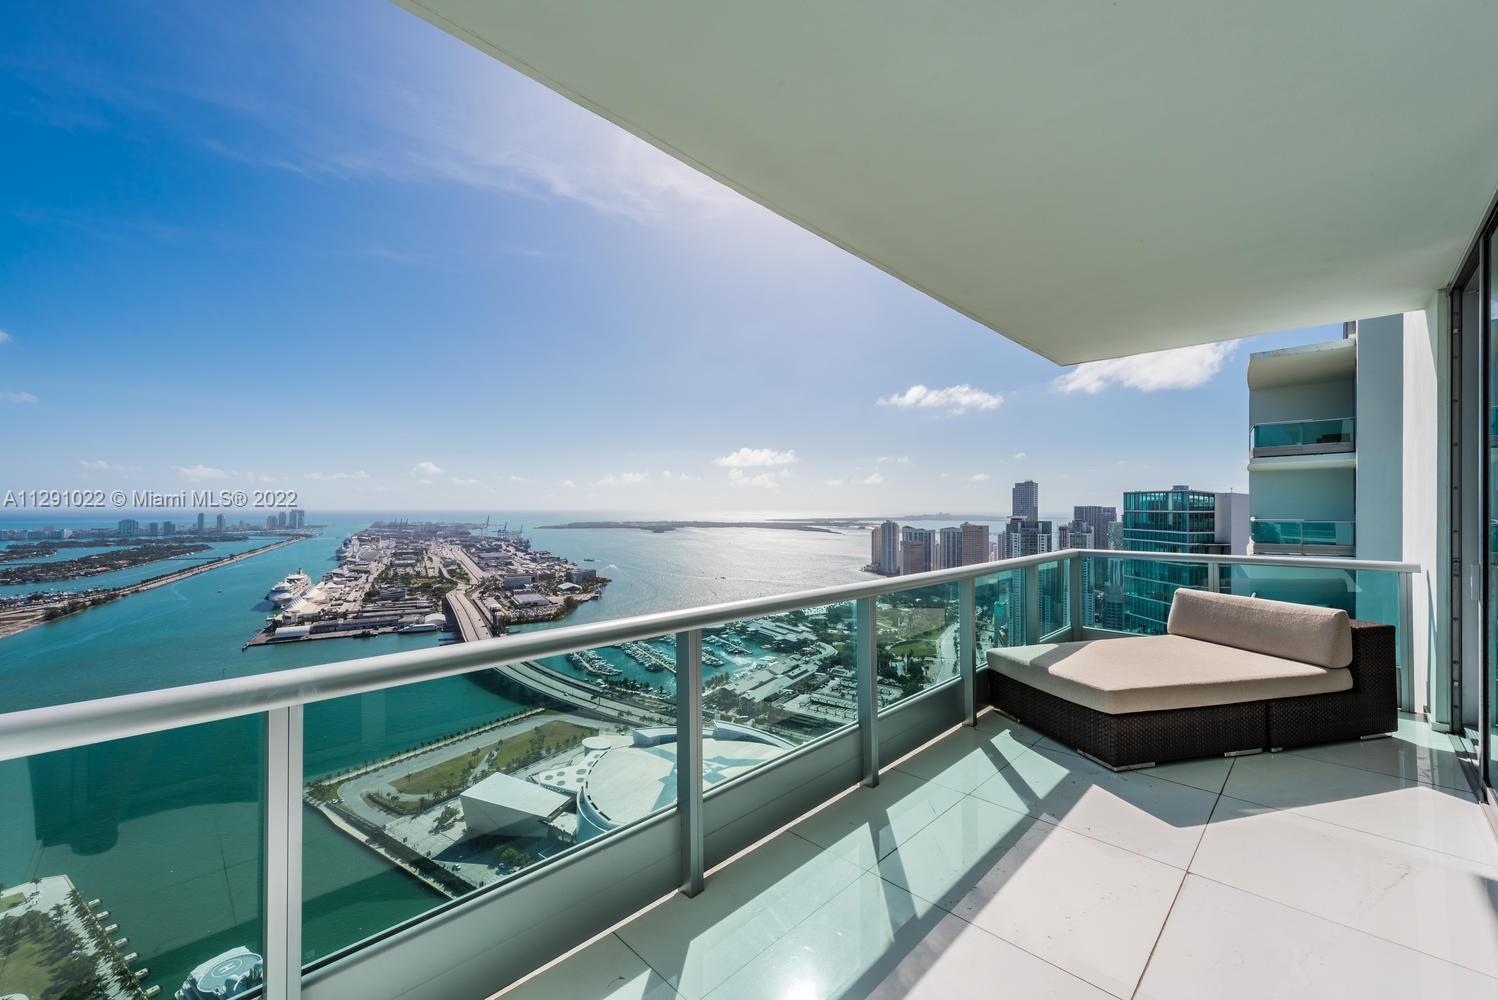 Live in ultimate luxury in this one-of-a-kind home in the sky. Boasting a wide and long terrace, offering sweeping views of the ocean, downtown skyline & sunrises/sunsets, this residence is an entertainer’s dream. Offering 3BR/3.5 BA.  This 2,647 sq ft unit comes partially furnished with high-end furniture throughout.  Floor-to-ceiling windows w/ stunning views from every room & an expansive modern layout master bedroom. Luxury amenities: 24hr concierge/security, 2 large pools, full-service gym/spa, theater, child playroom & more. 2 Parking spaces located on the 2nd floor, in front of the elevator's entrance door. Sold partially furnished. Storage Included. Penthouse C